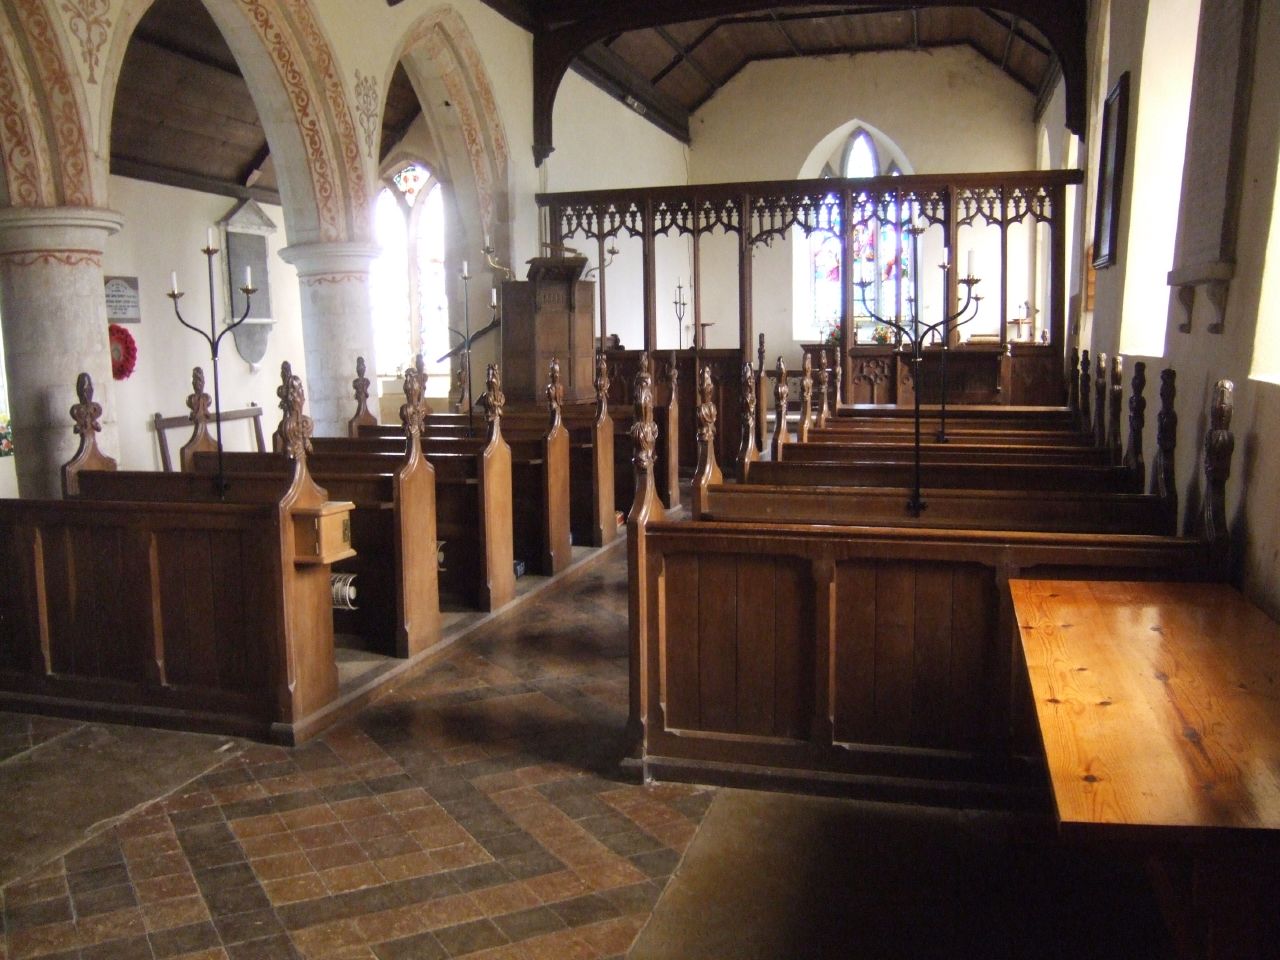 church pews with benches and stained glass windows